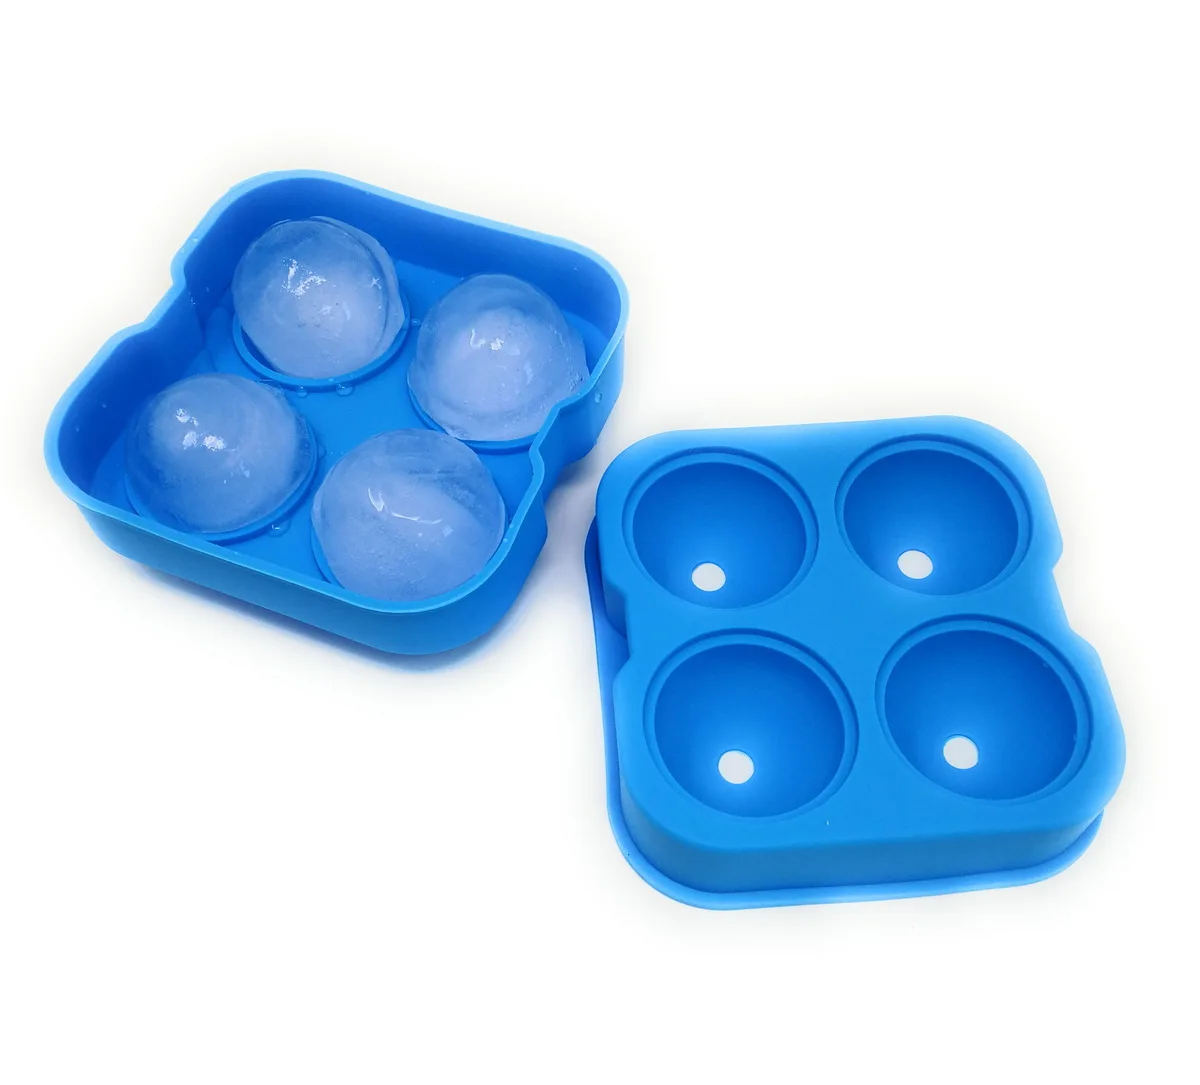 

2020 New Arrivals Crystal Clear Ice Ball Maker Whiskey Sphere Silicone Ice Ball Mold Flexible Silicone Ice Cube Tray, Pantone color